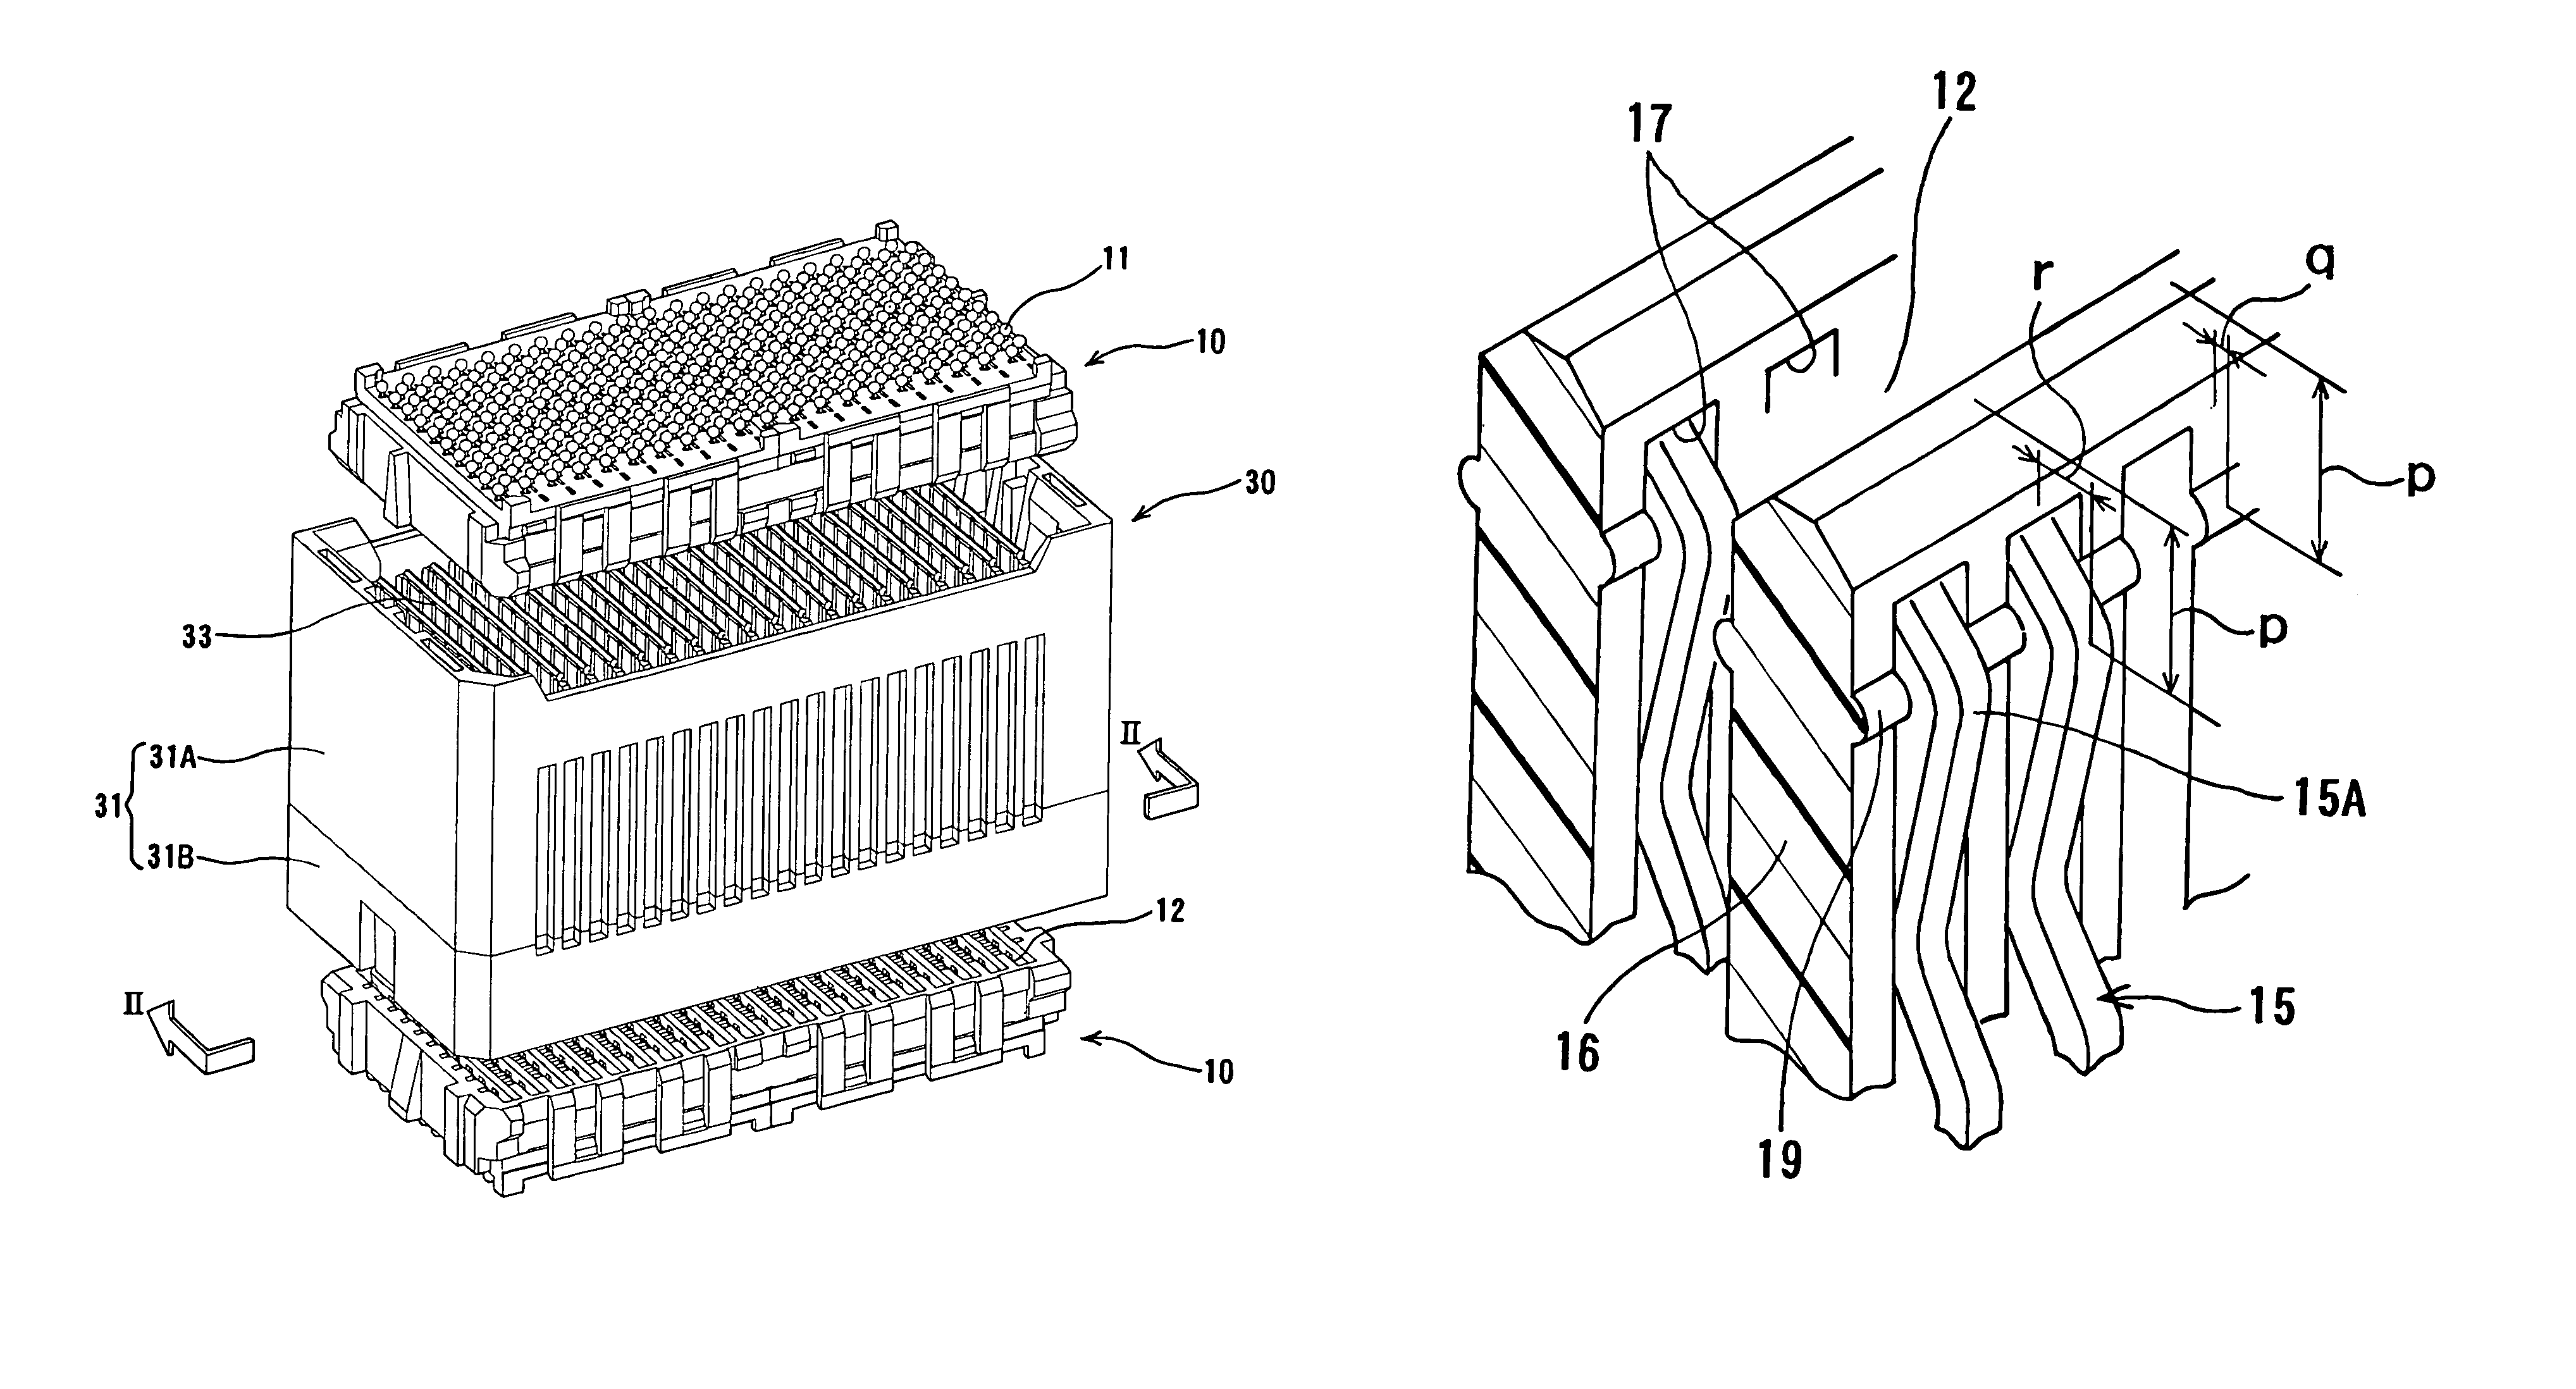 Board electrical connector, and electrical connector assembly having board electrical connector and middle electrical connector